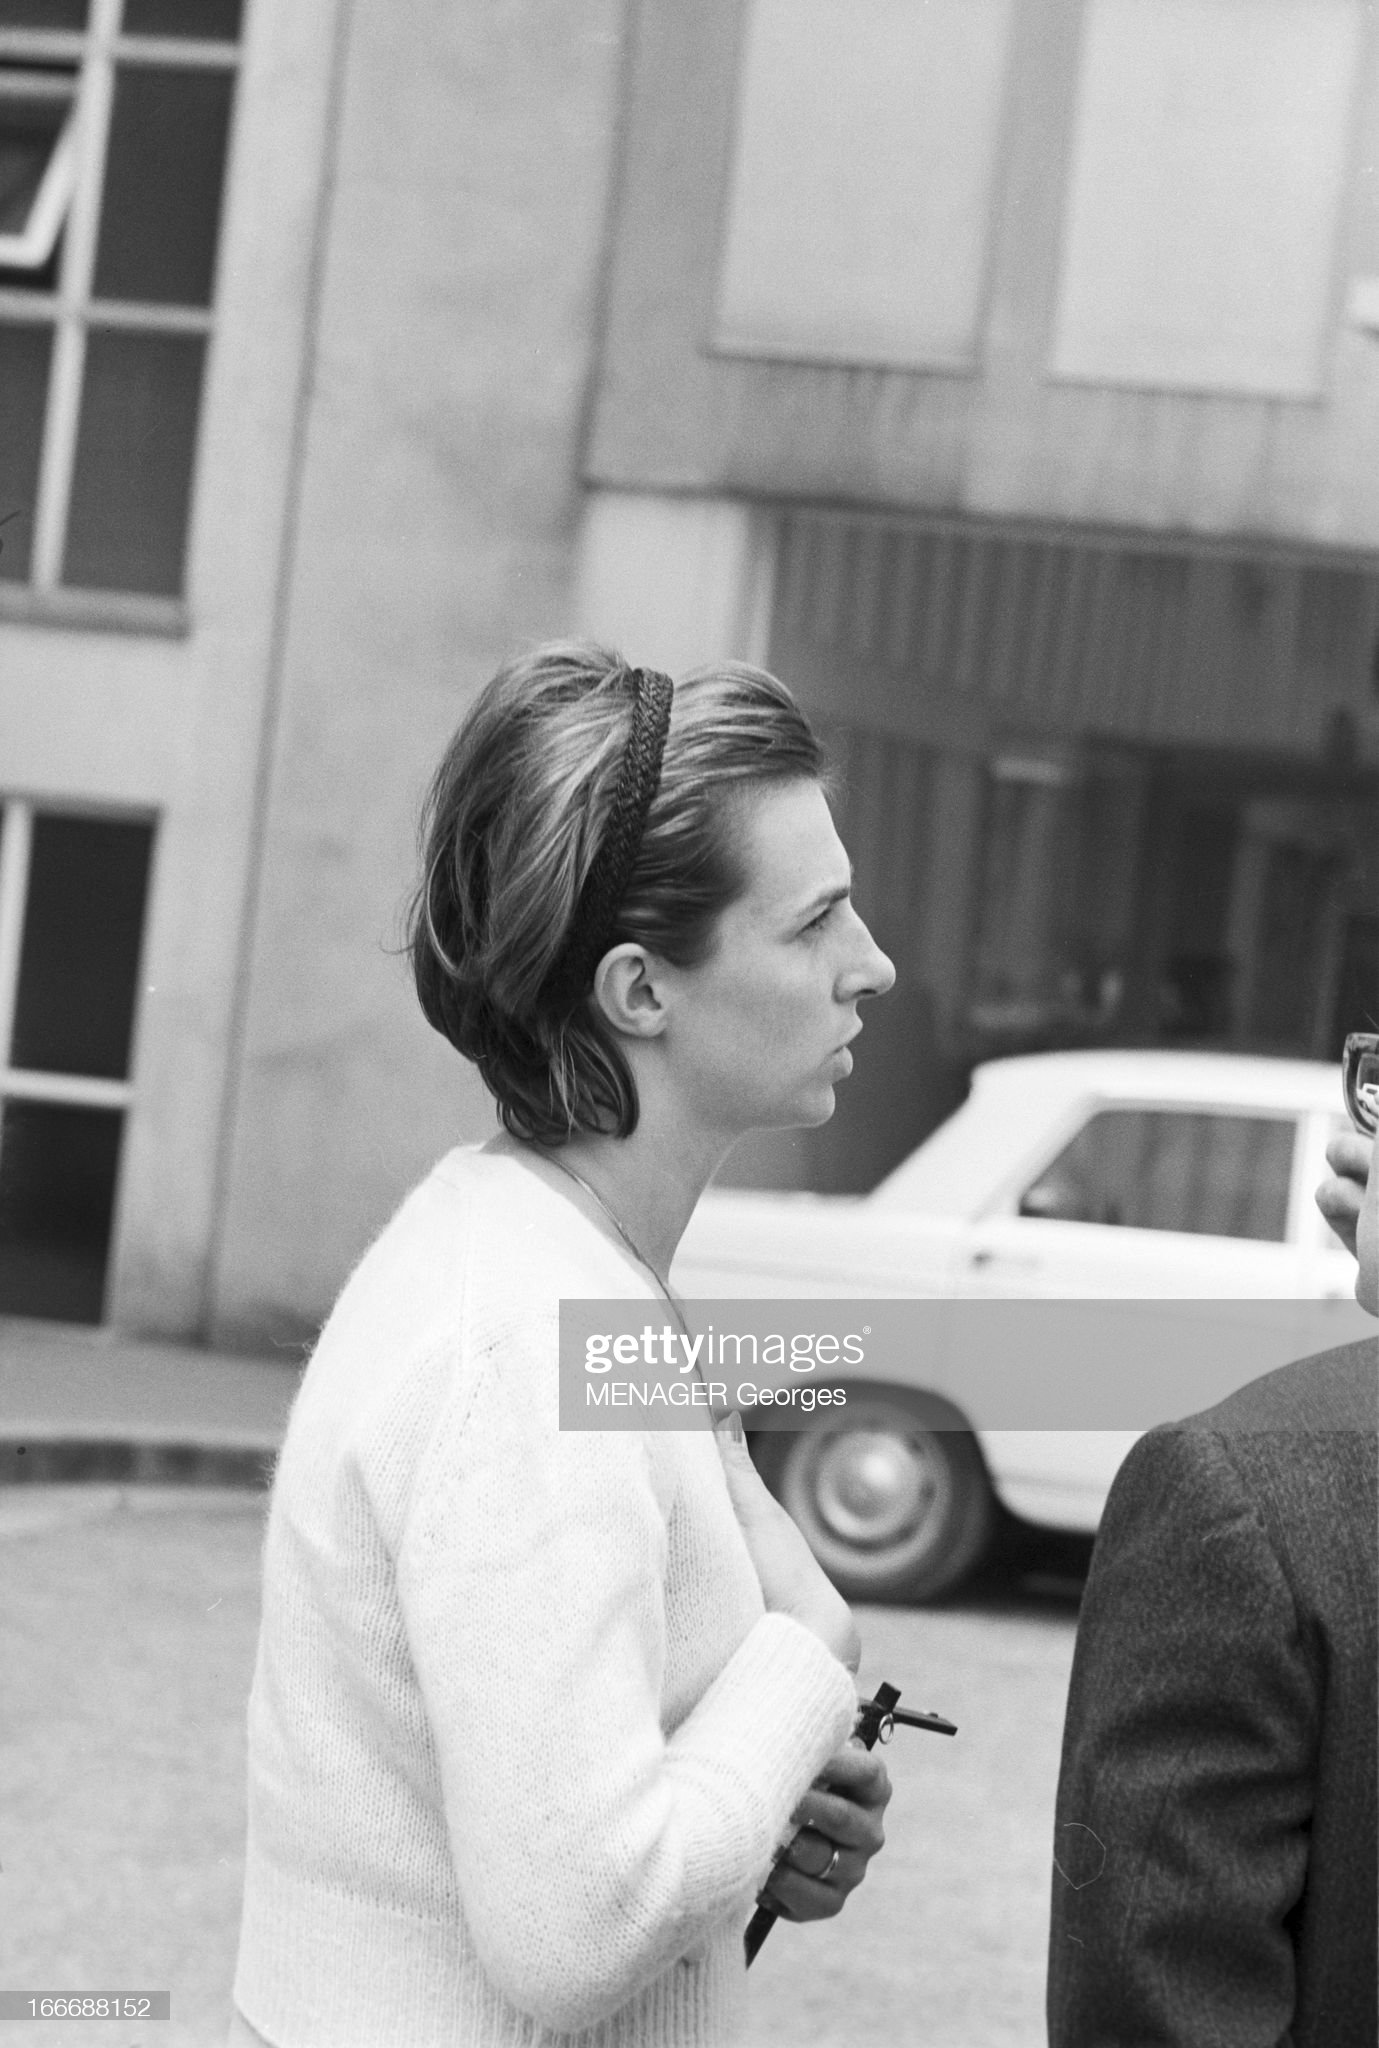 In May 1967, during the Monaco Grand Prix, the Italian driver Lorenzo Bandini, in a Ferrari 321, had an accident in the Principality and was transported to the Princess Grace Hospital. His wife Margherita anxiously awaited the doctors' verdict. 